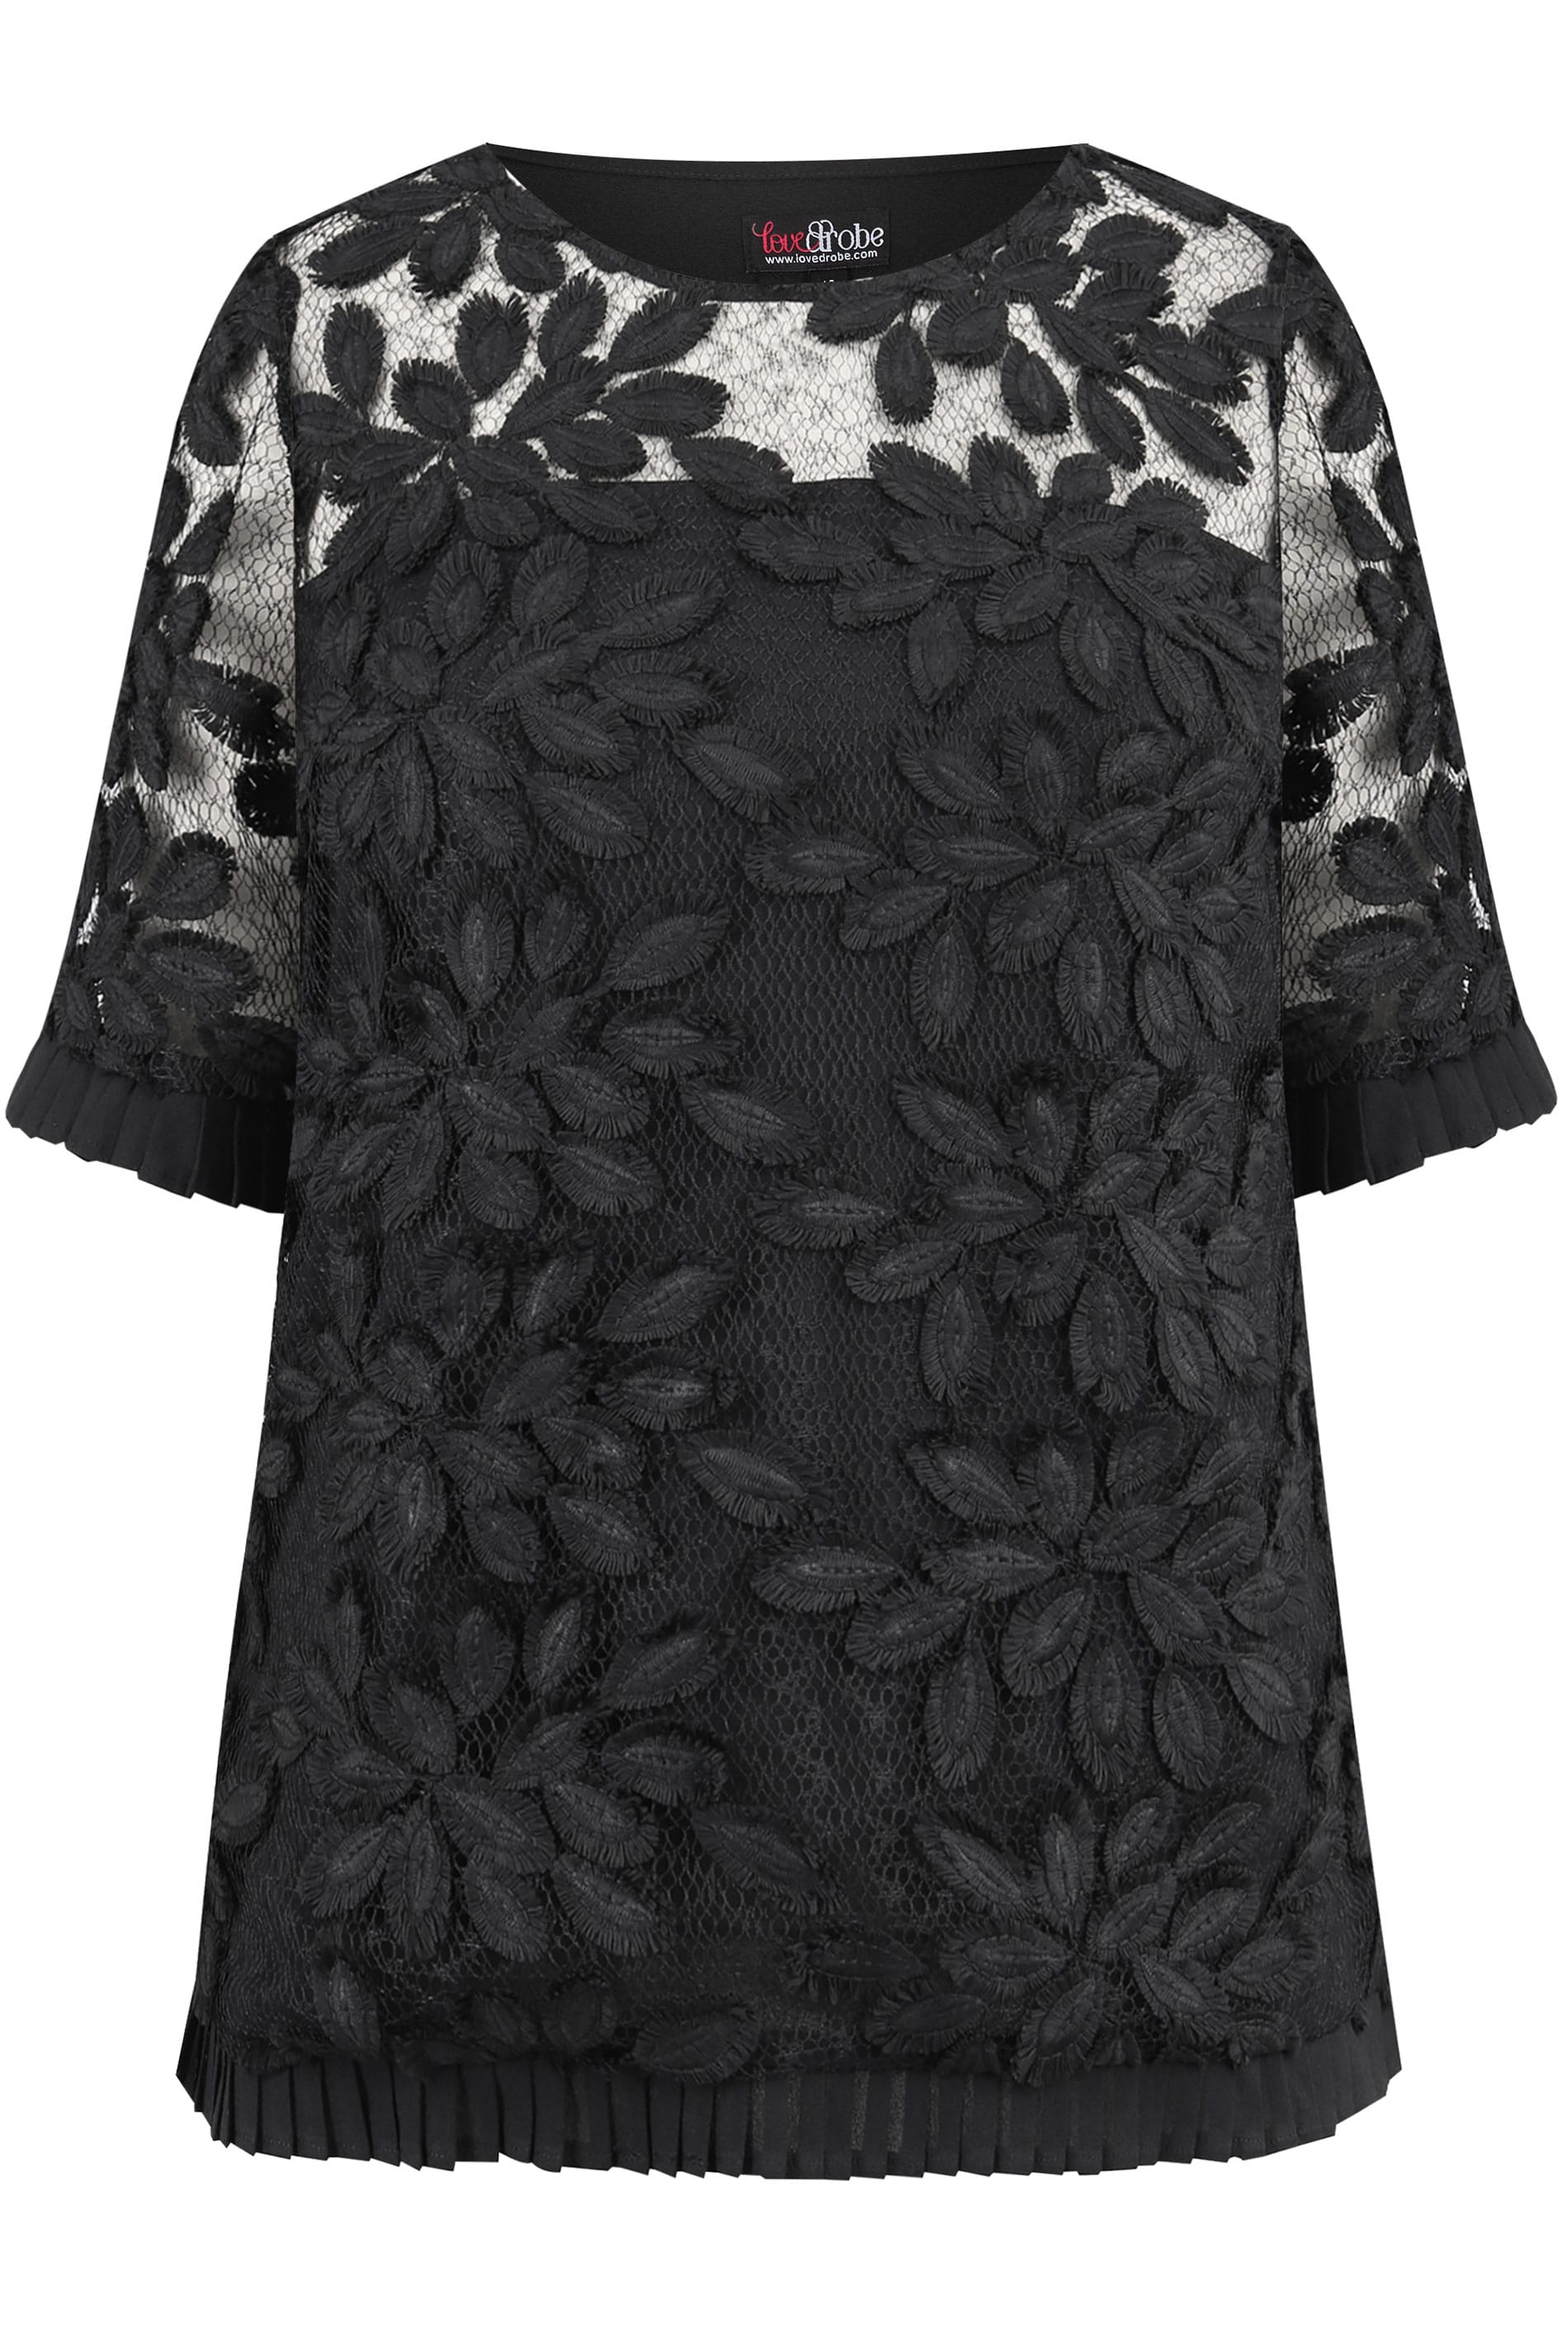 Lovedrobe Black Floral Lace Pleated Top, Plus size 16 to 32